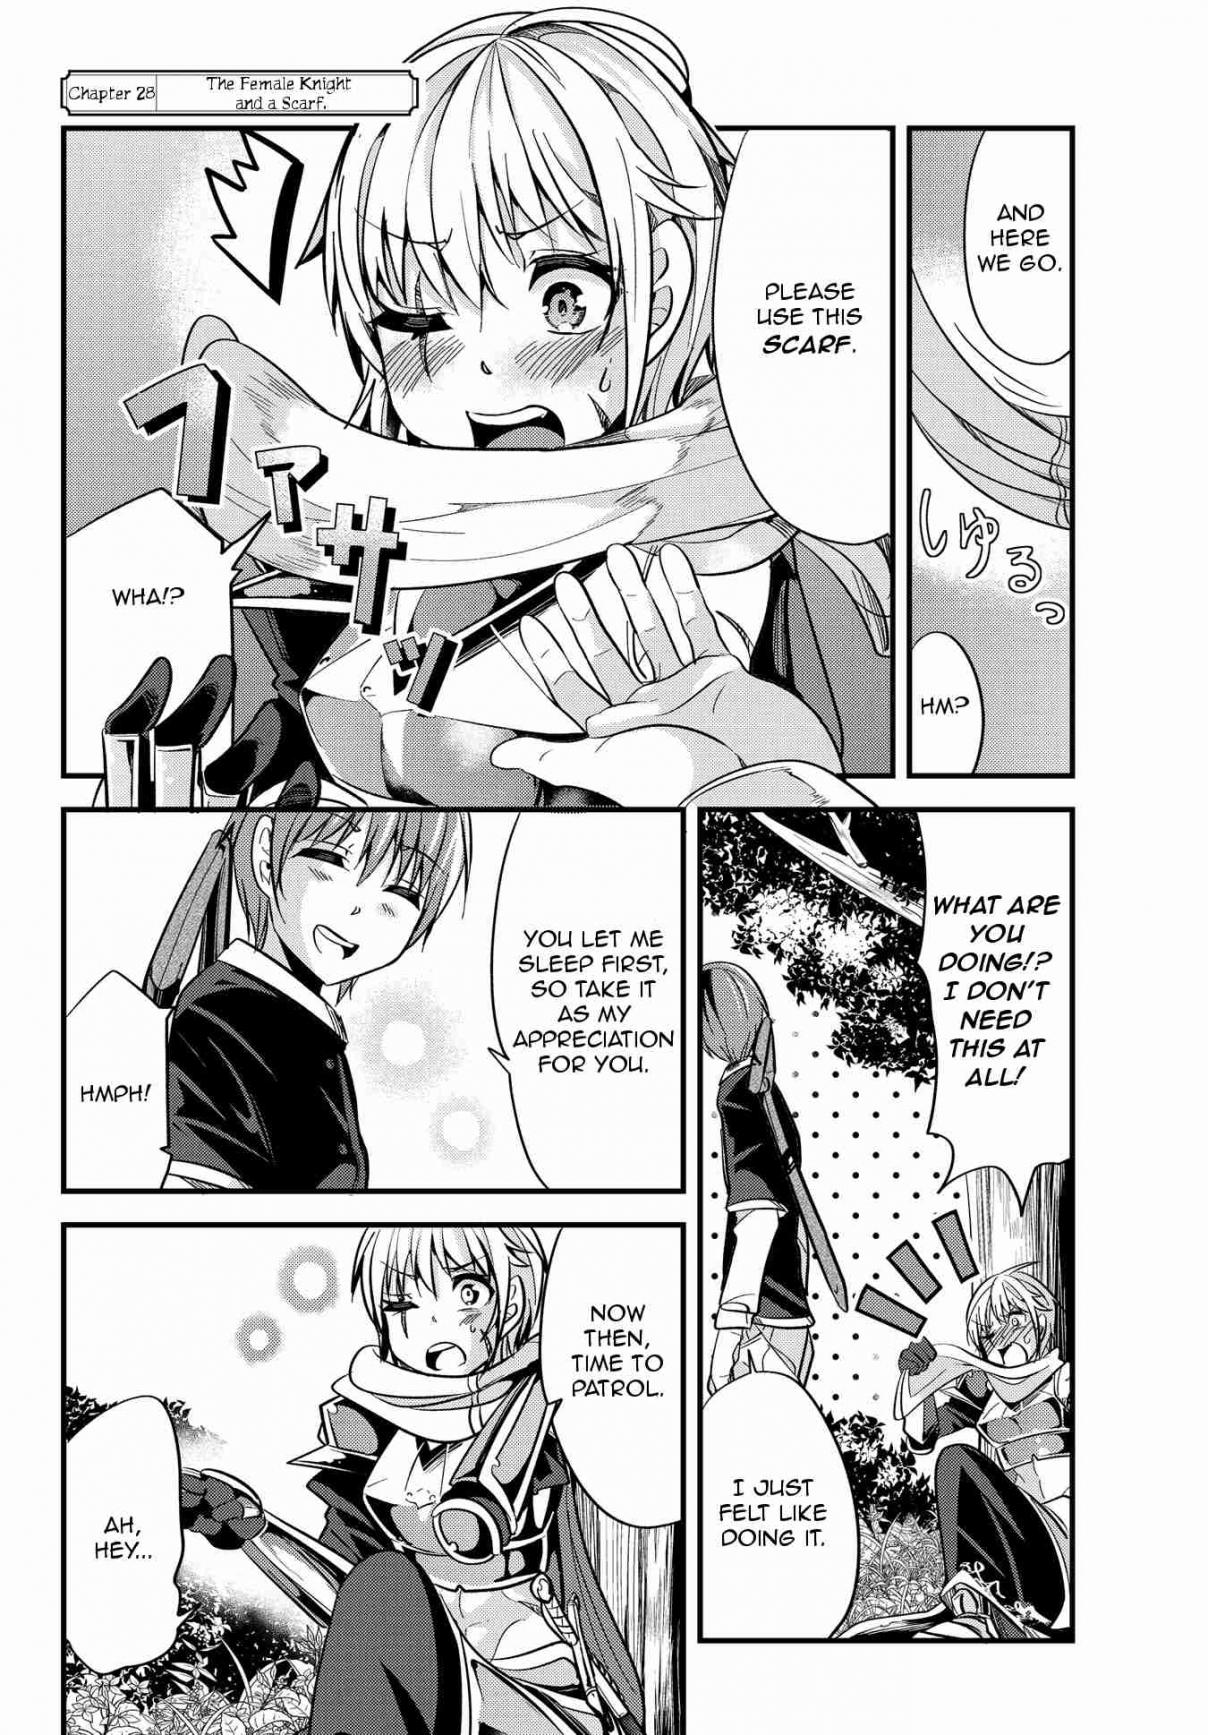 A Story About Treating a Female Knight, Who Has Never Been Treated as a Woman, as a Woman Ch. 28 The Female Knight and a Scarf